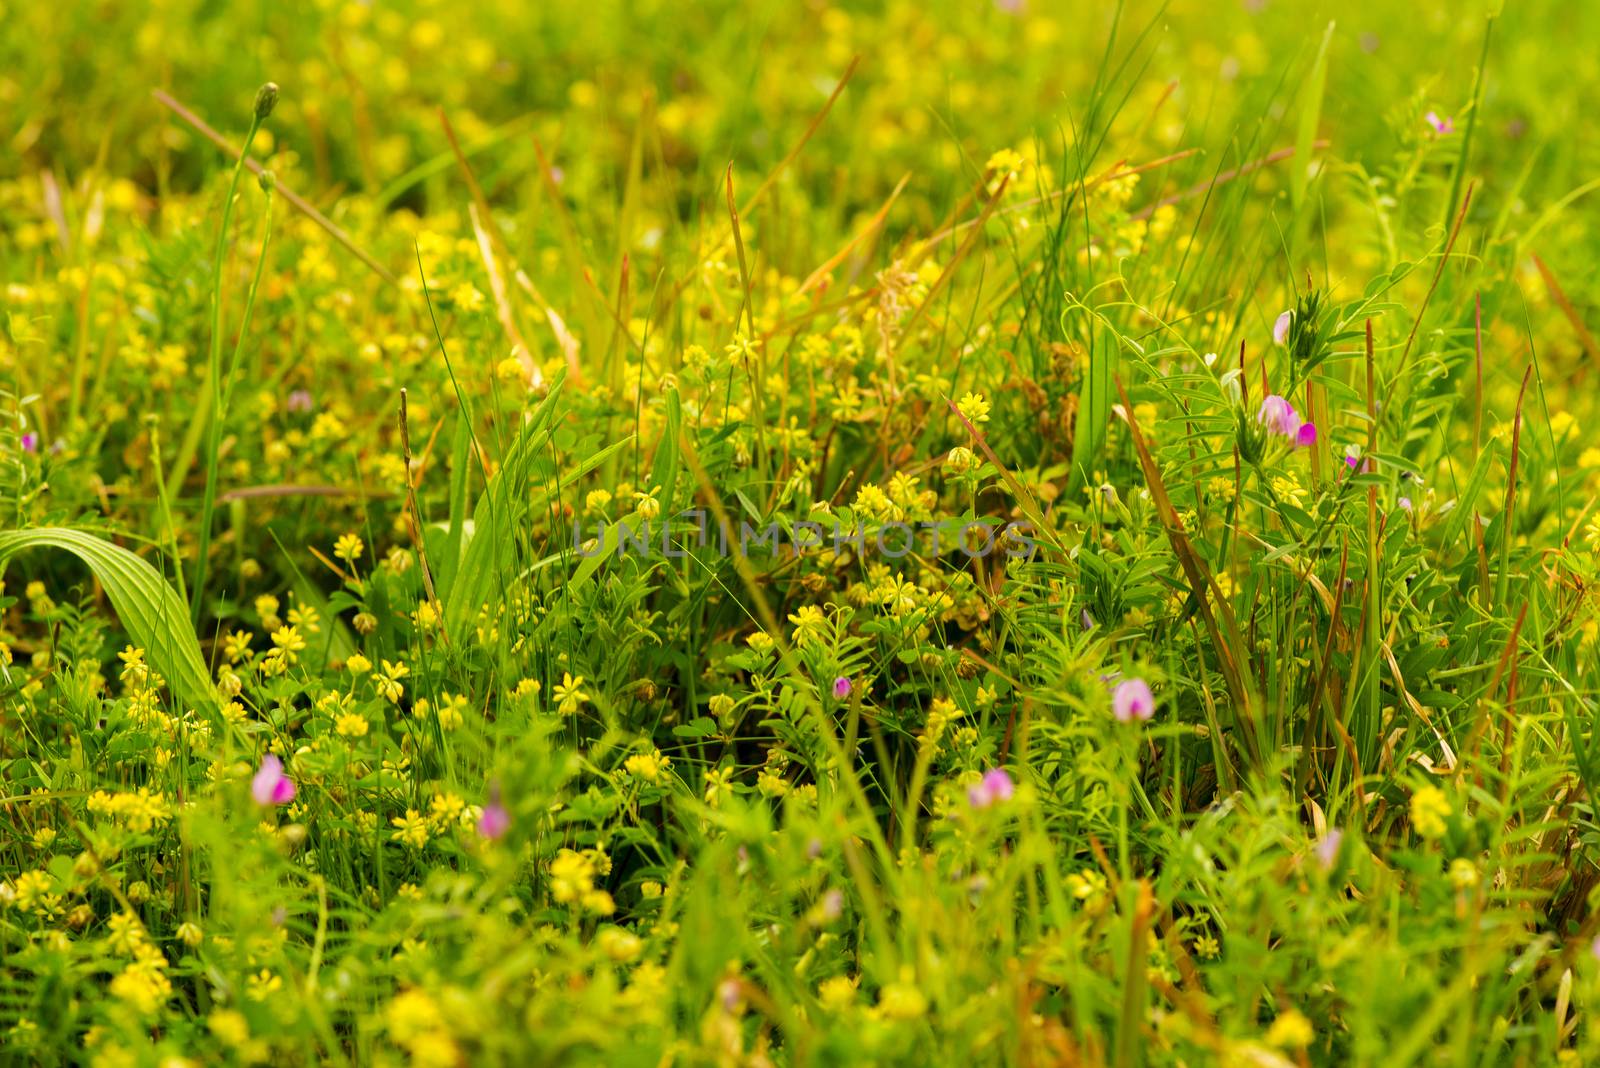 Multiple weeds growing among teh grass during spring